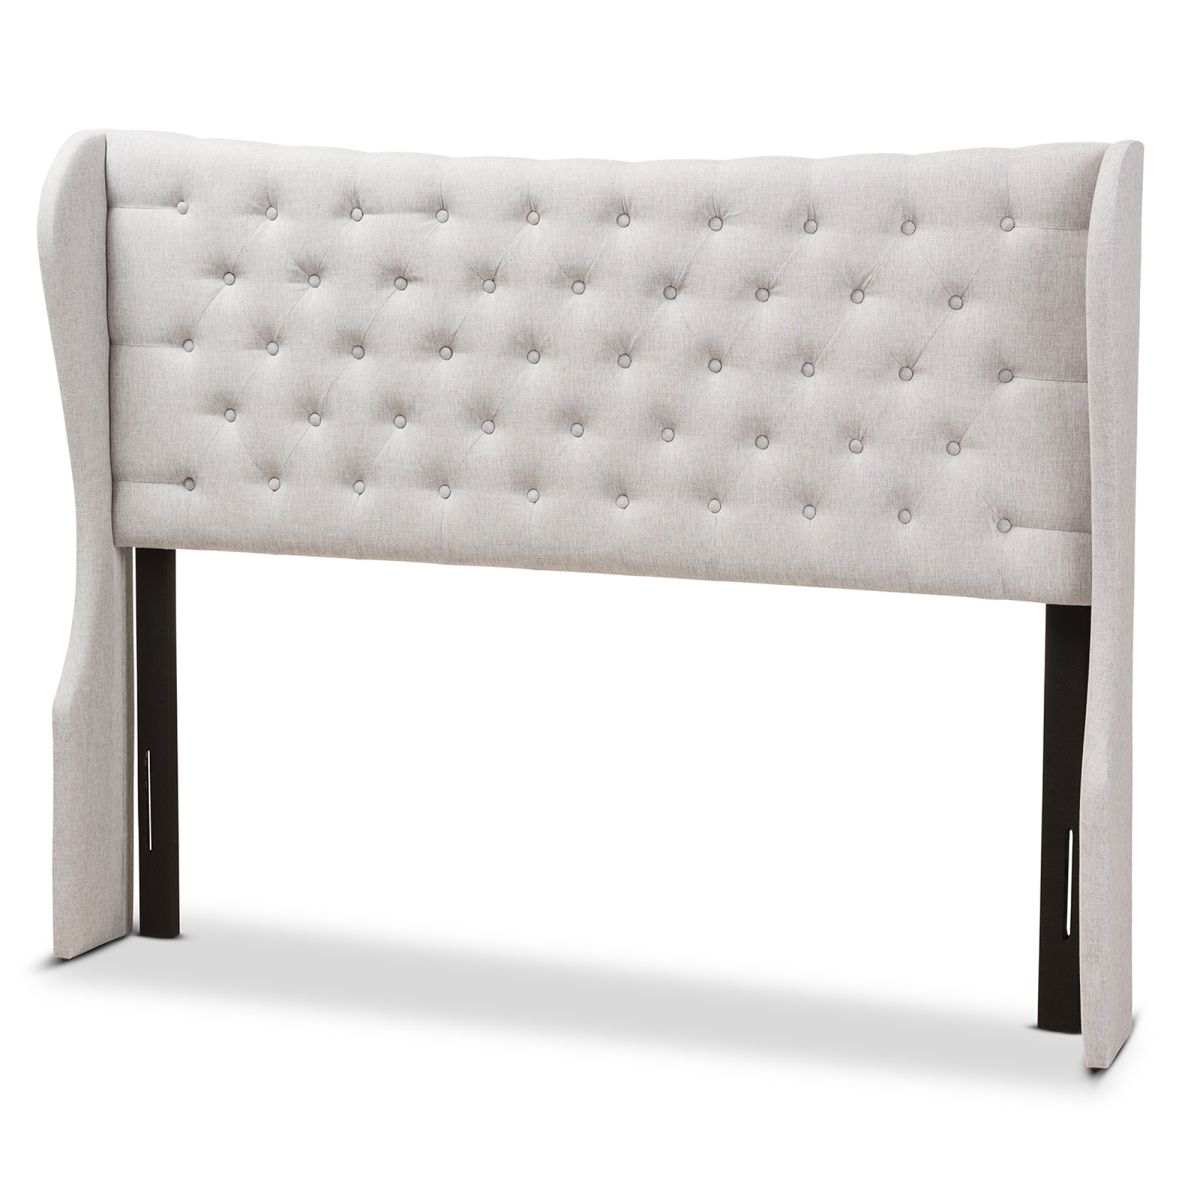 Picture of Baxton Studio BBT6631-Greyish Beige-Queen HB Cadence Modern & Contemporary Greyish Beige Fabric Button - Tufted Queen Size Winged Headboard